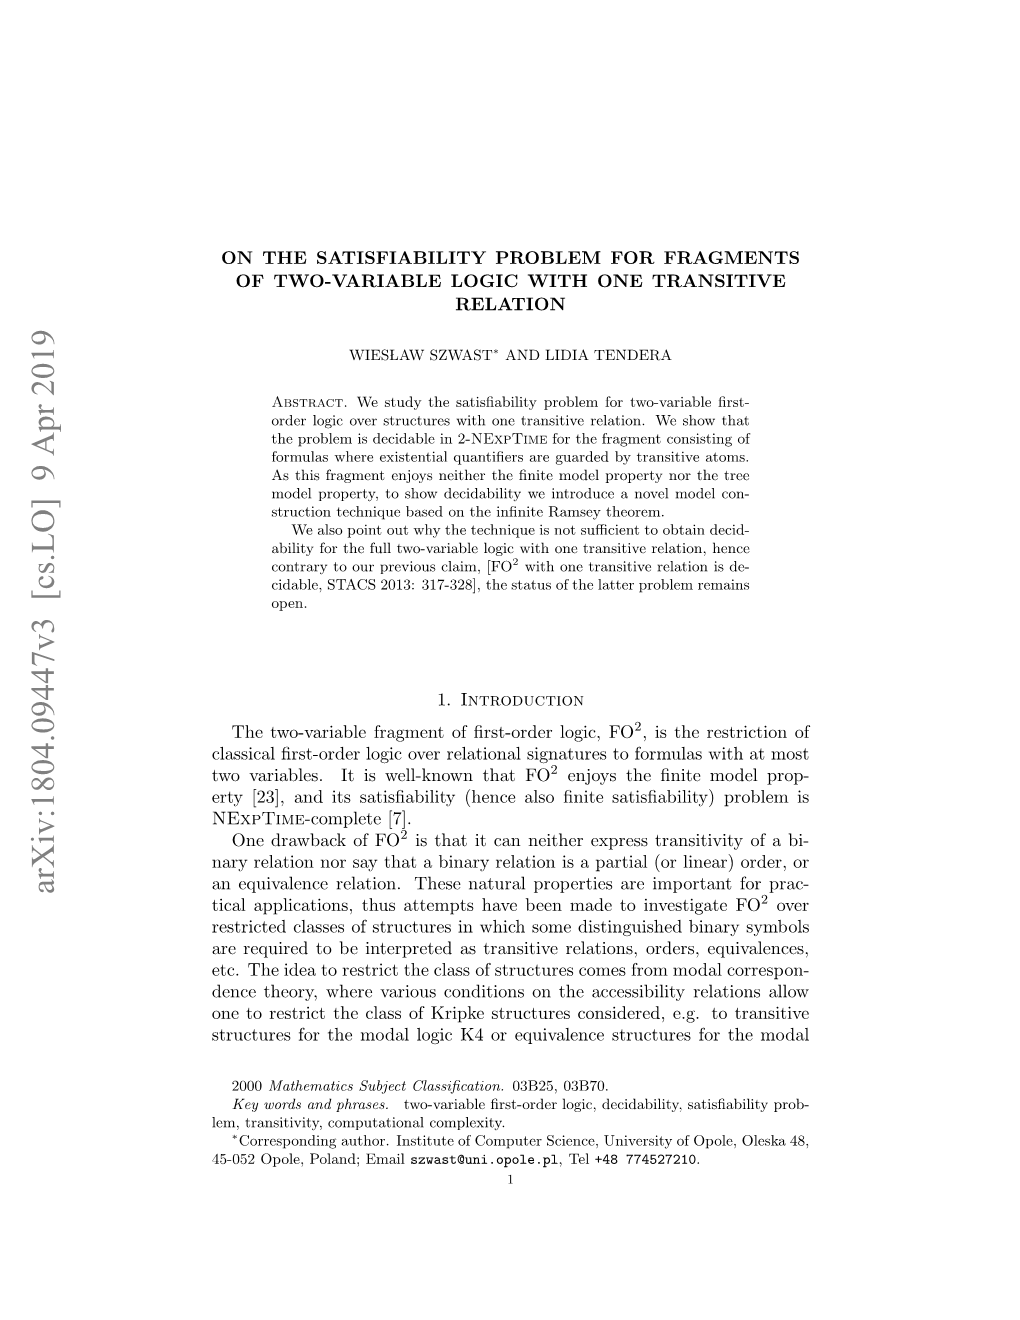 On the Satisfiability Problem for Fragments of the Two-Variable Logic